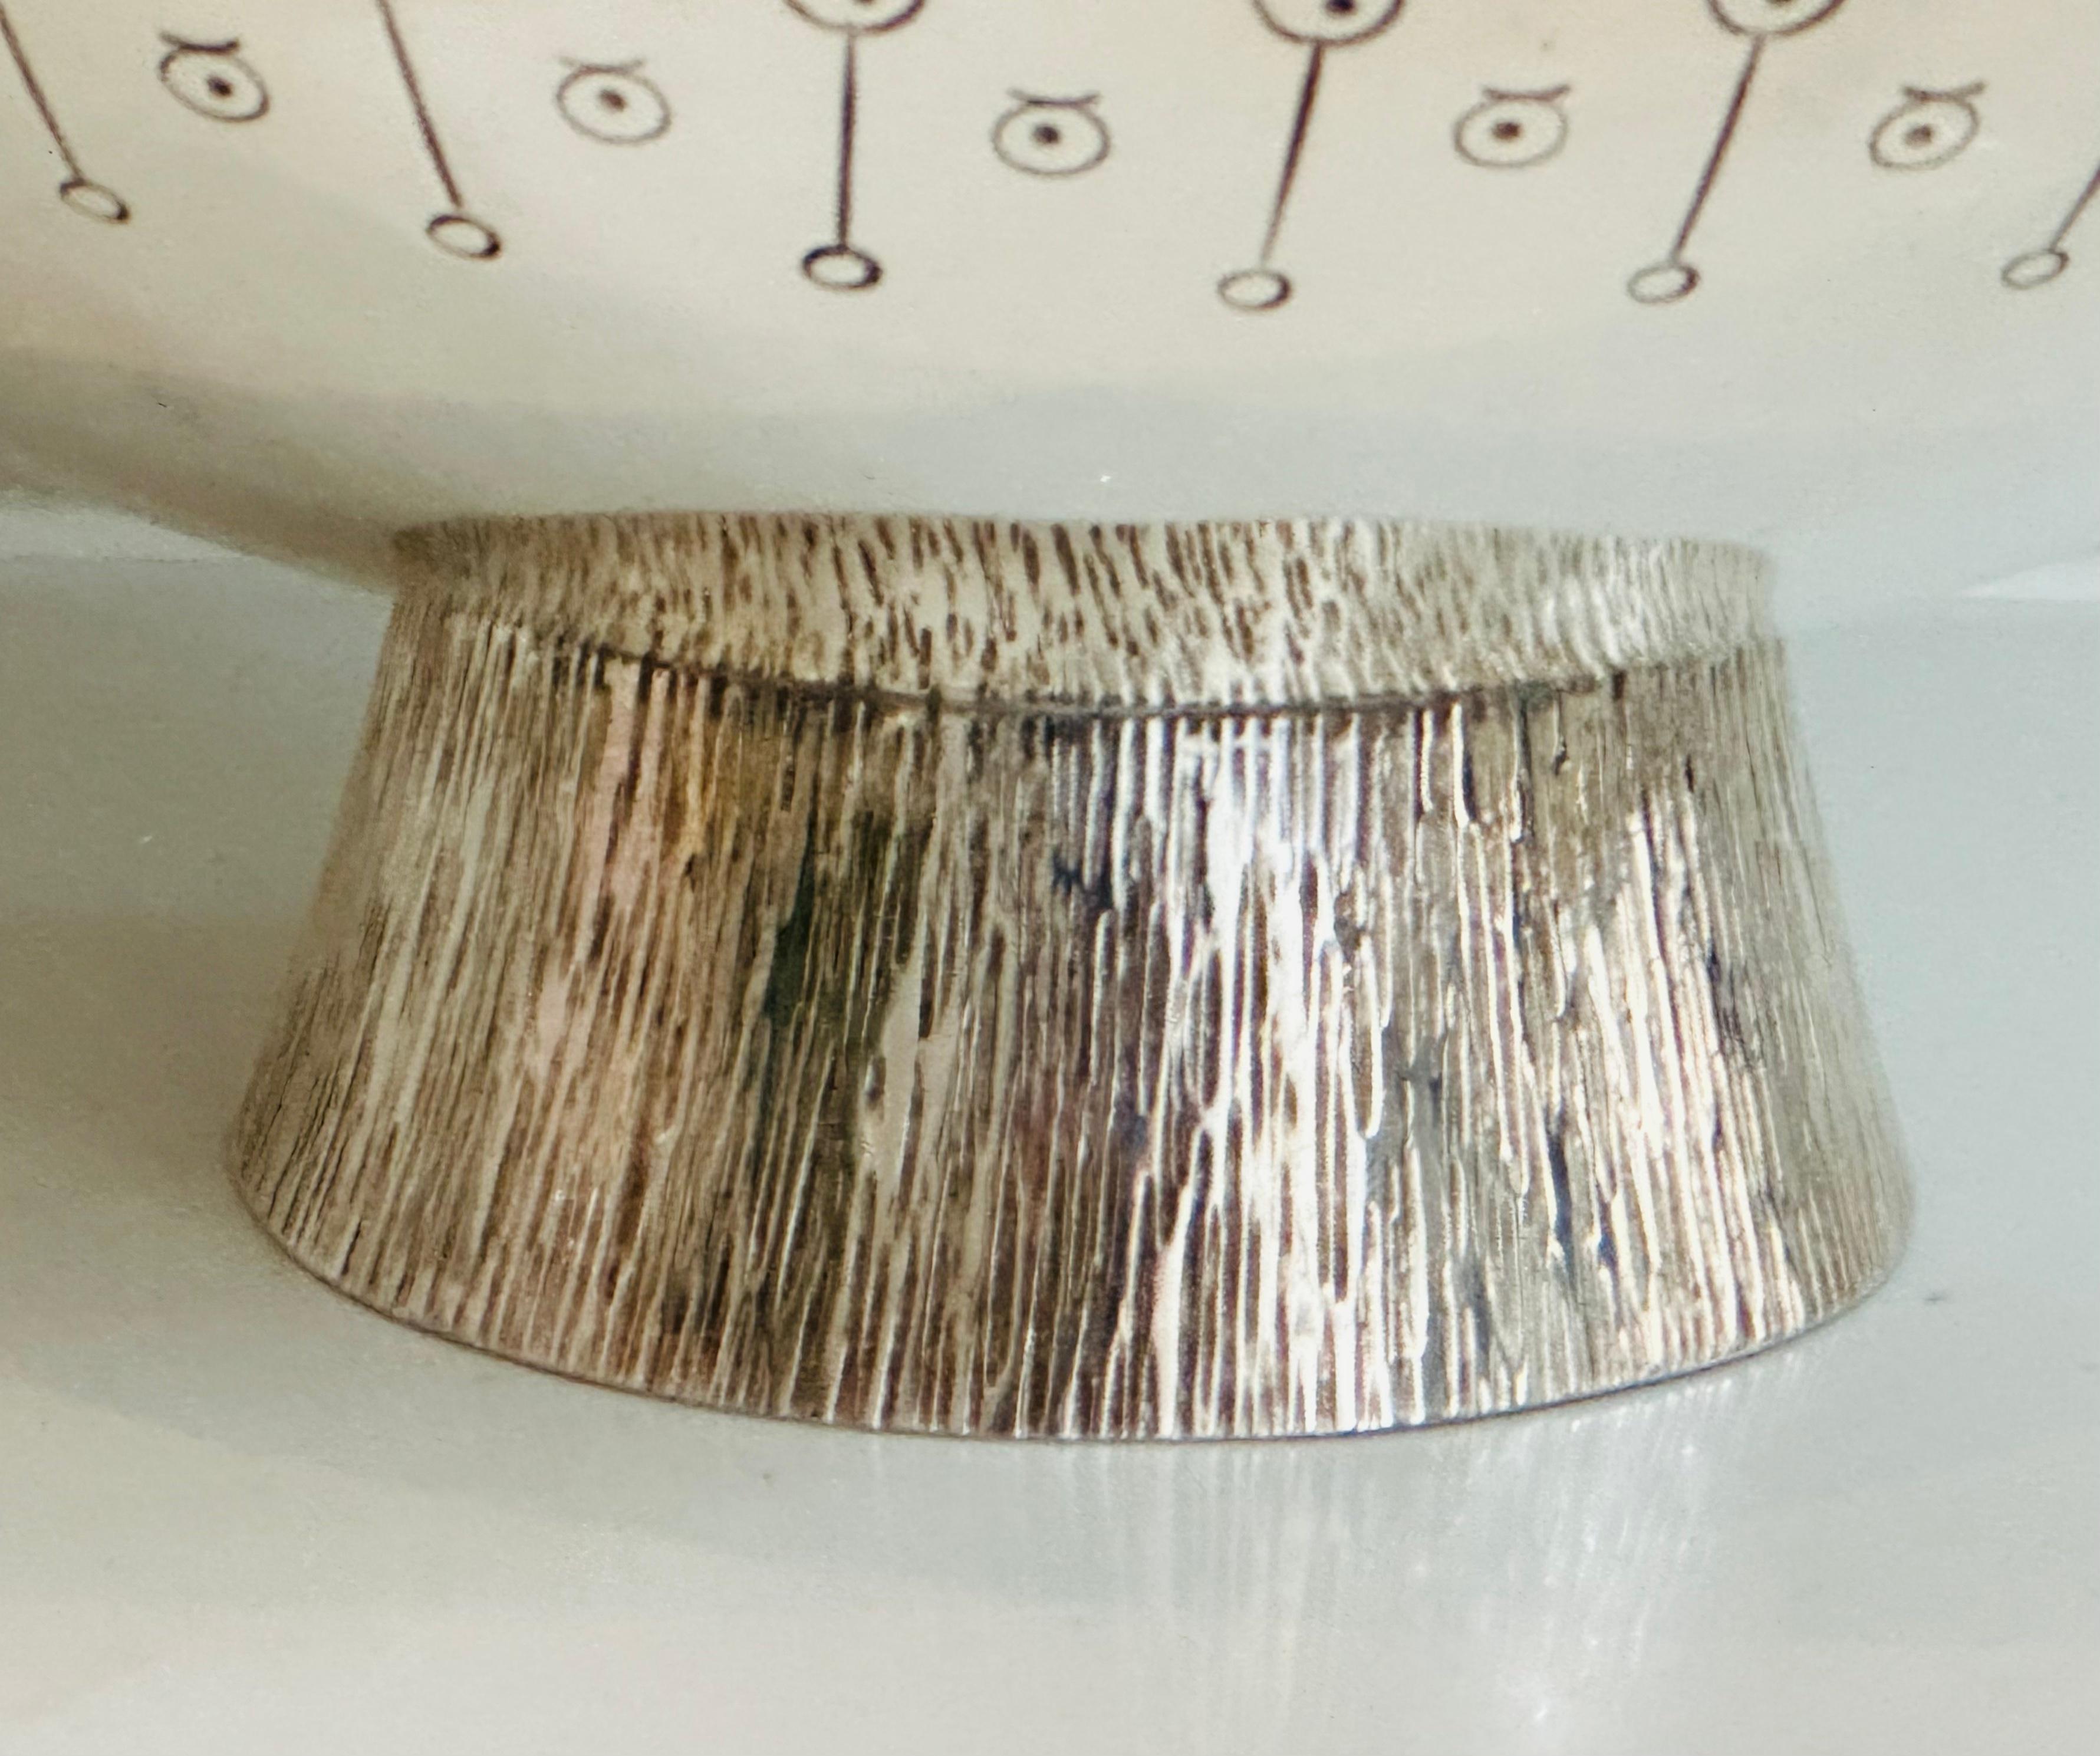 1980s English Silver Plated Decorative Hand-Hammered Serving or Display Bowl For Sale 9